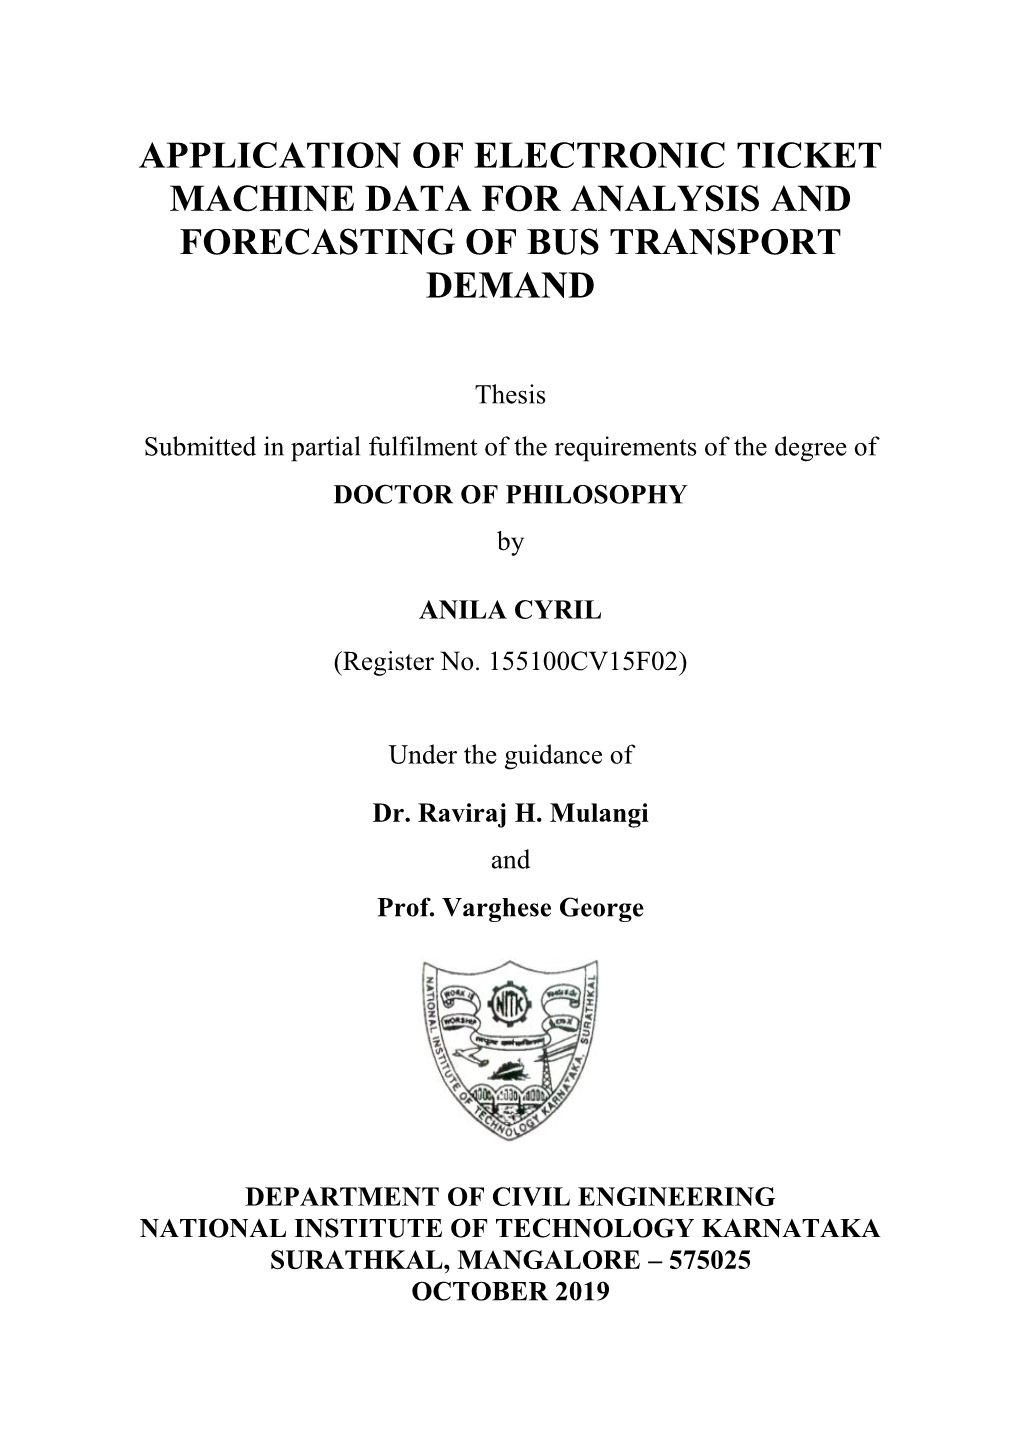 Application of Electronic Ticket Machine Data for Analysis and Forecasting of Bus Transport Demand